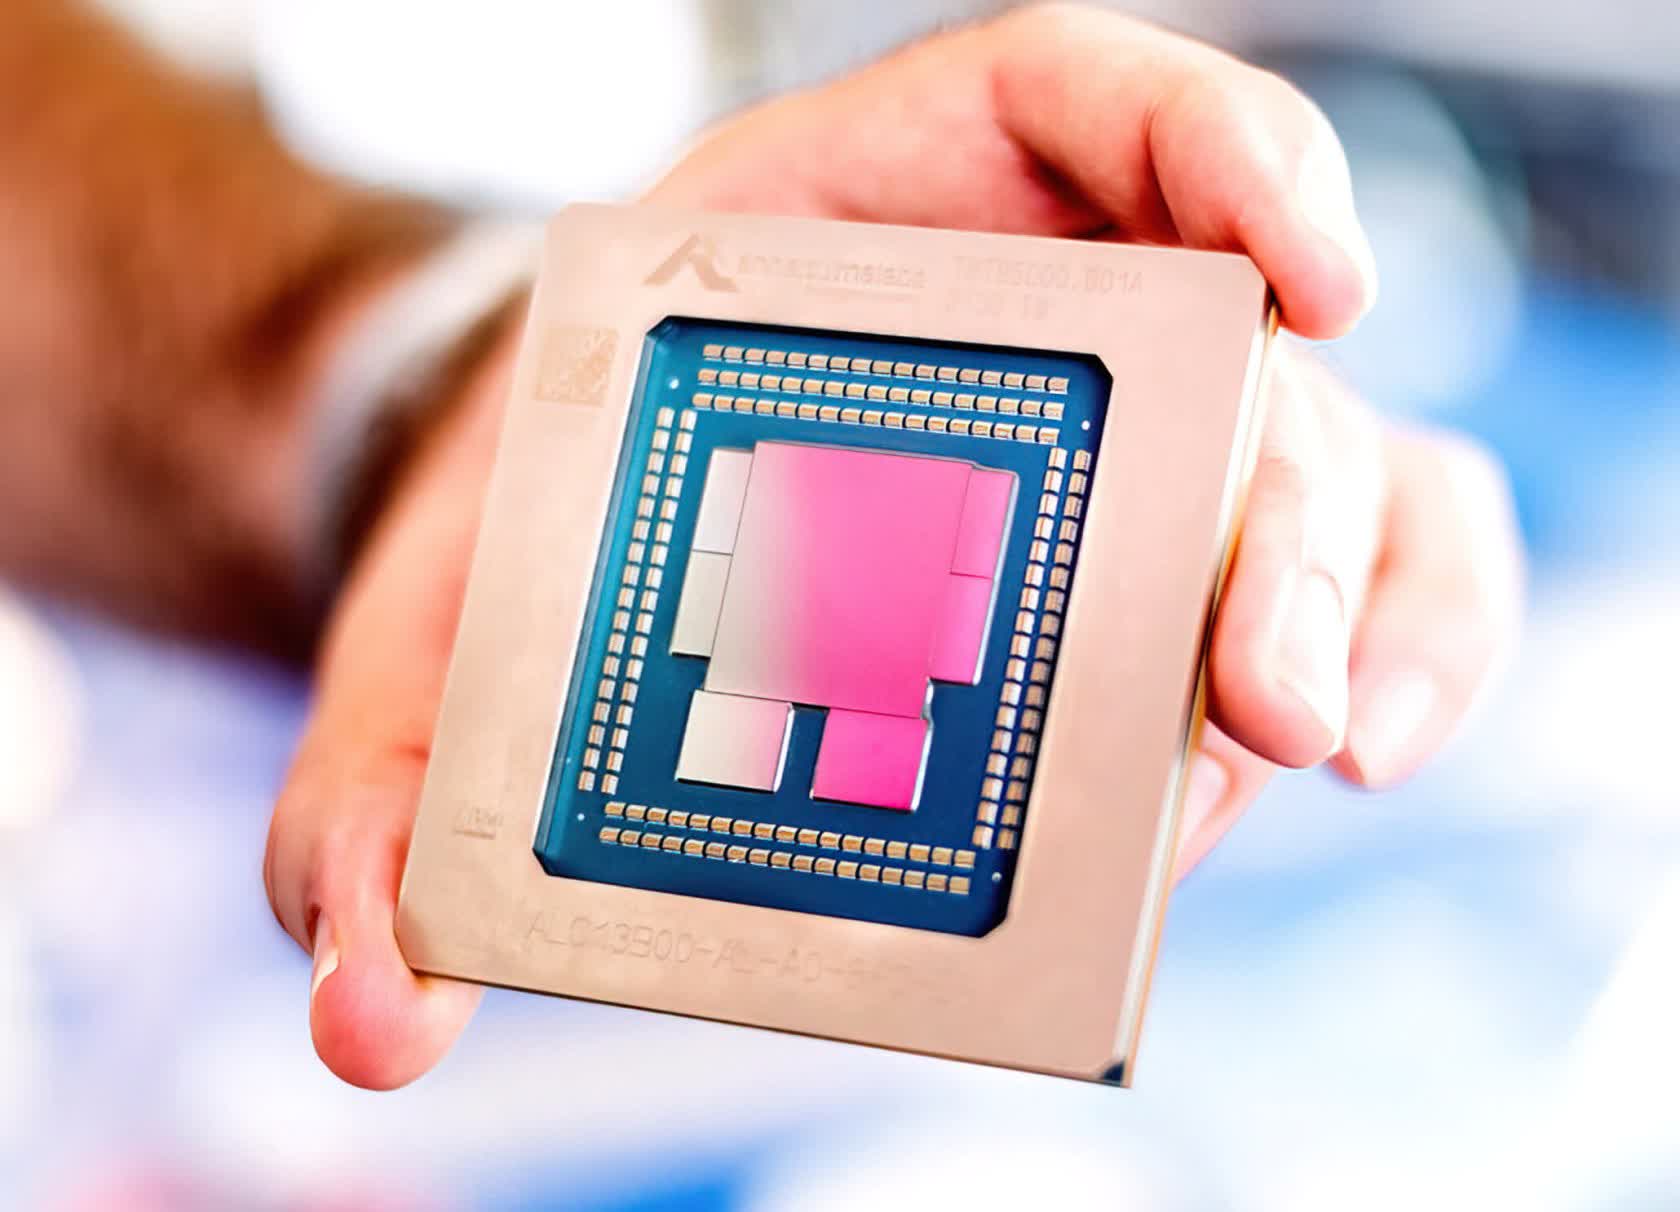 Why is Amazon building CPUs?